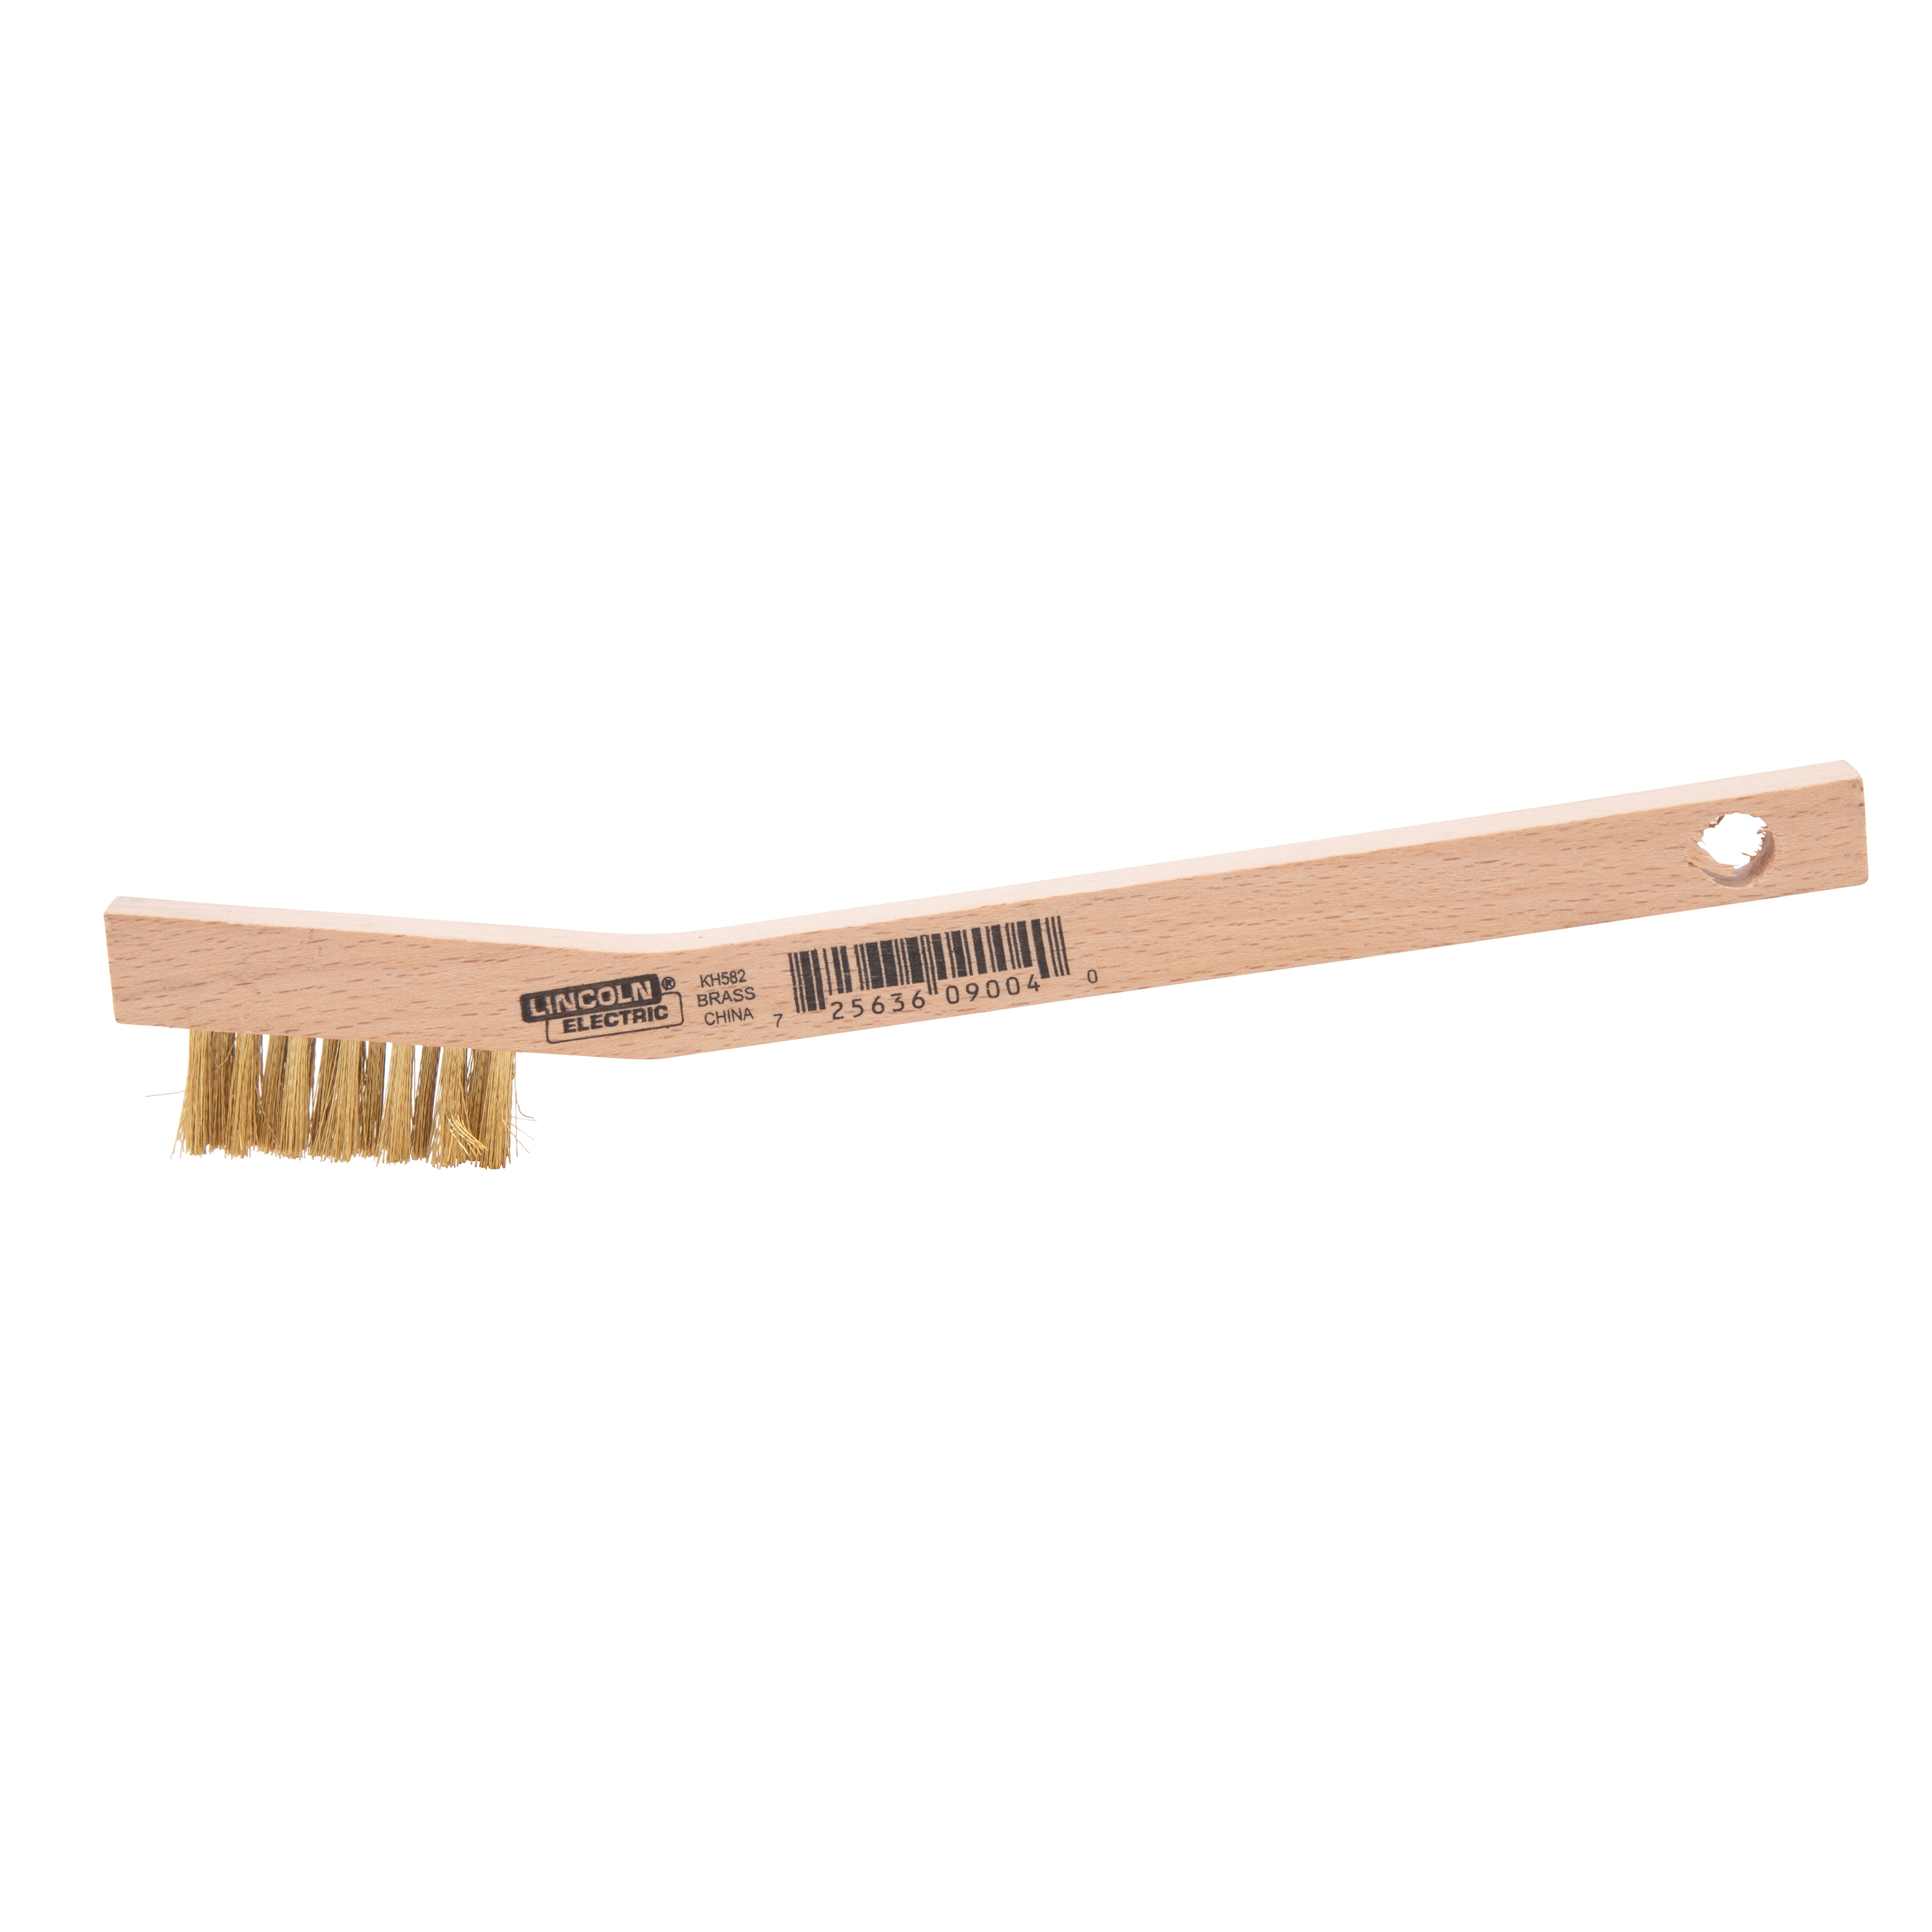 Lincoln Electric Small Brass Bristle Wire Brush 3x7, Off-white, Soft  Bristles, Light Duty Cleaning, Wire Brush